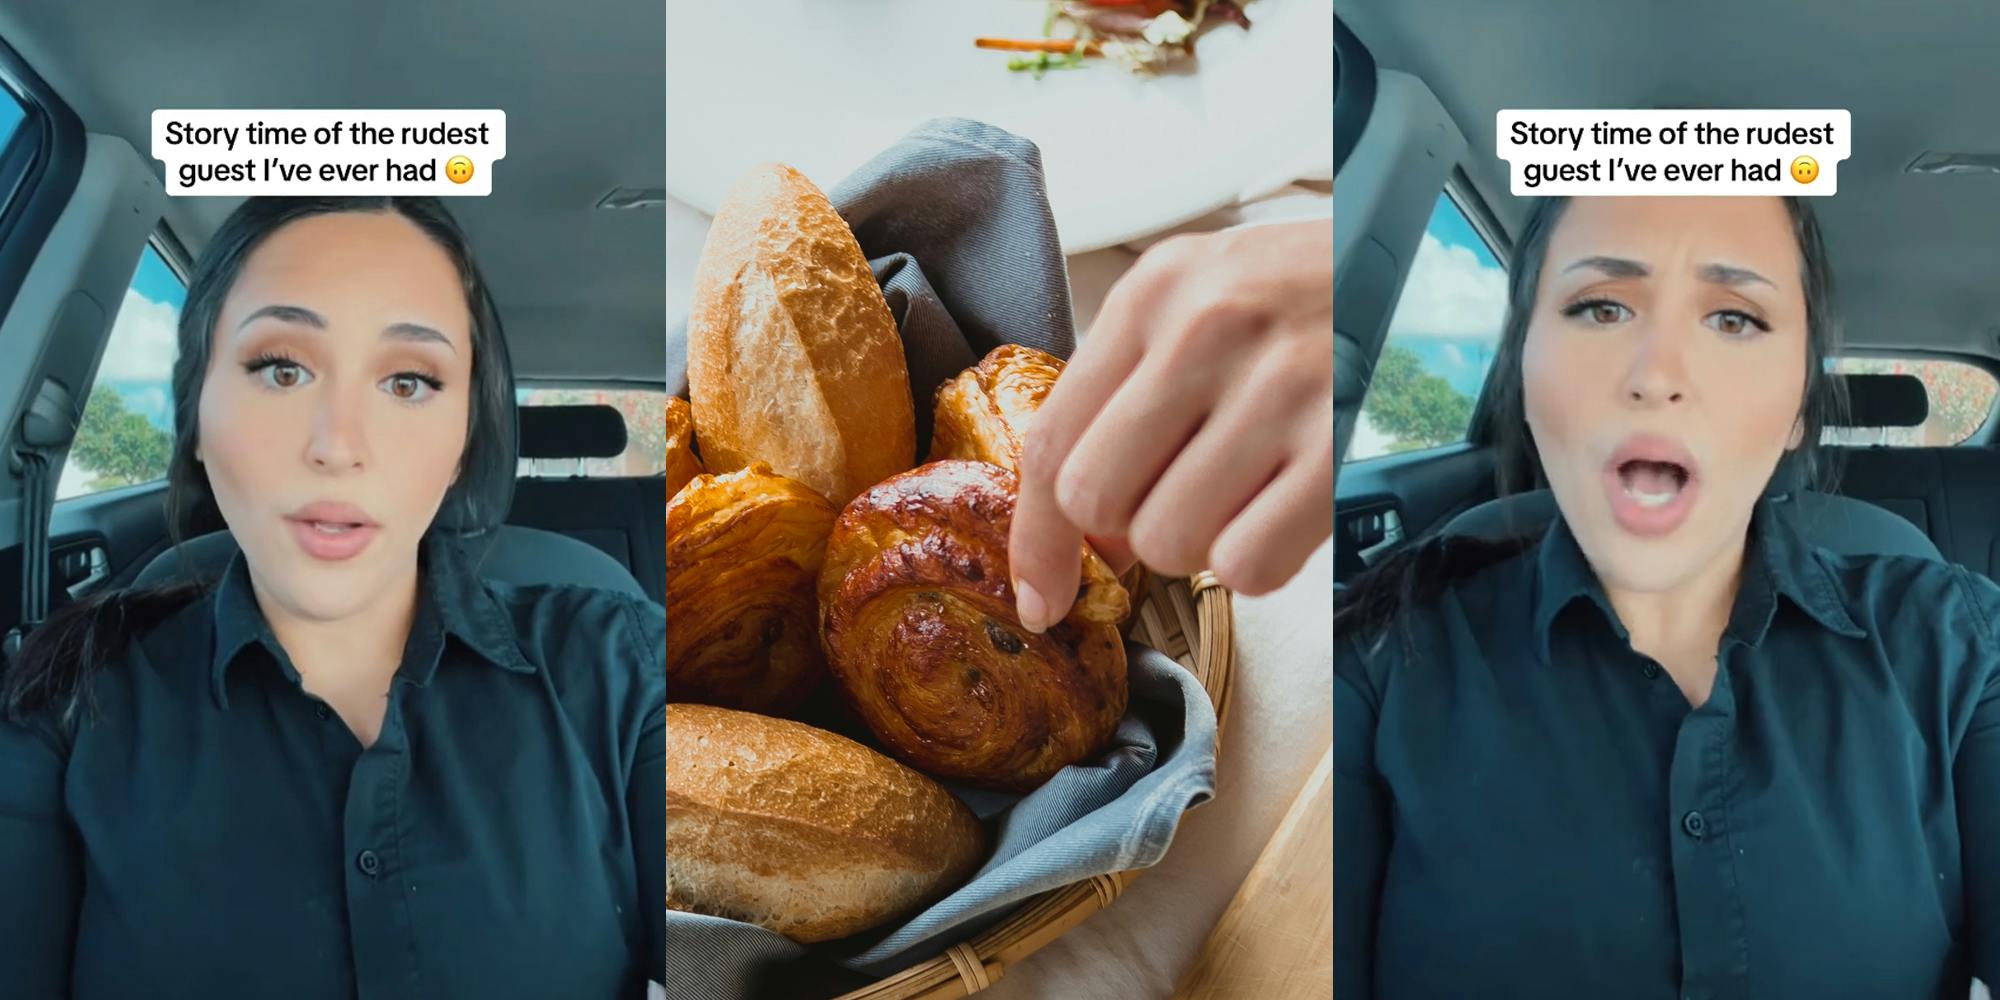 server speaking in car with caption "Story time of the rudest guest I've ever had" (l) hand reaching into bread basket on table (c) server speaking in car with caption "Story time of the rudest guest I've ever had" (r)